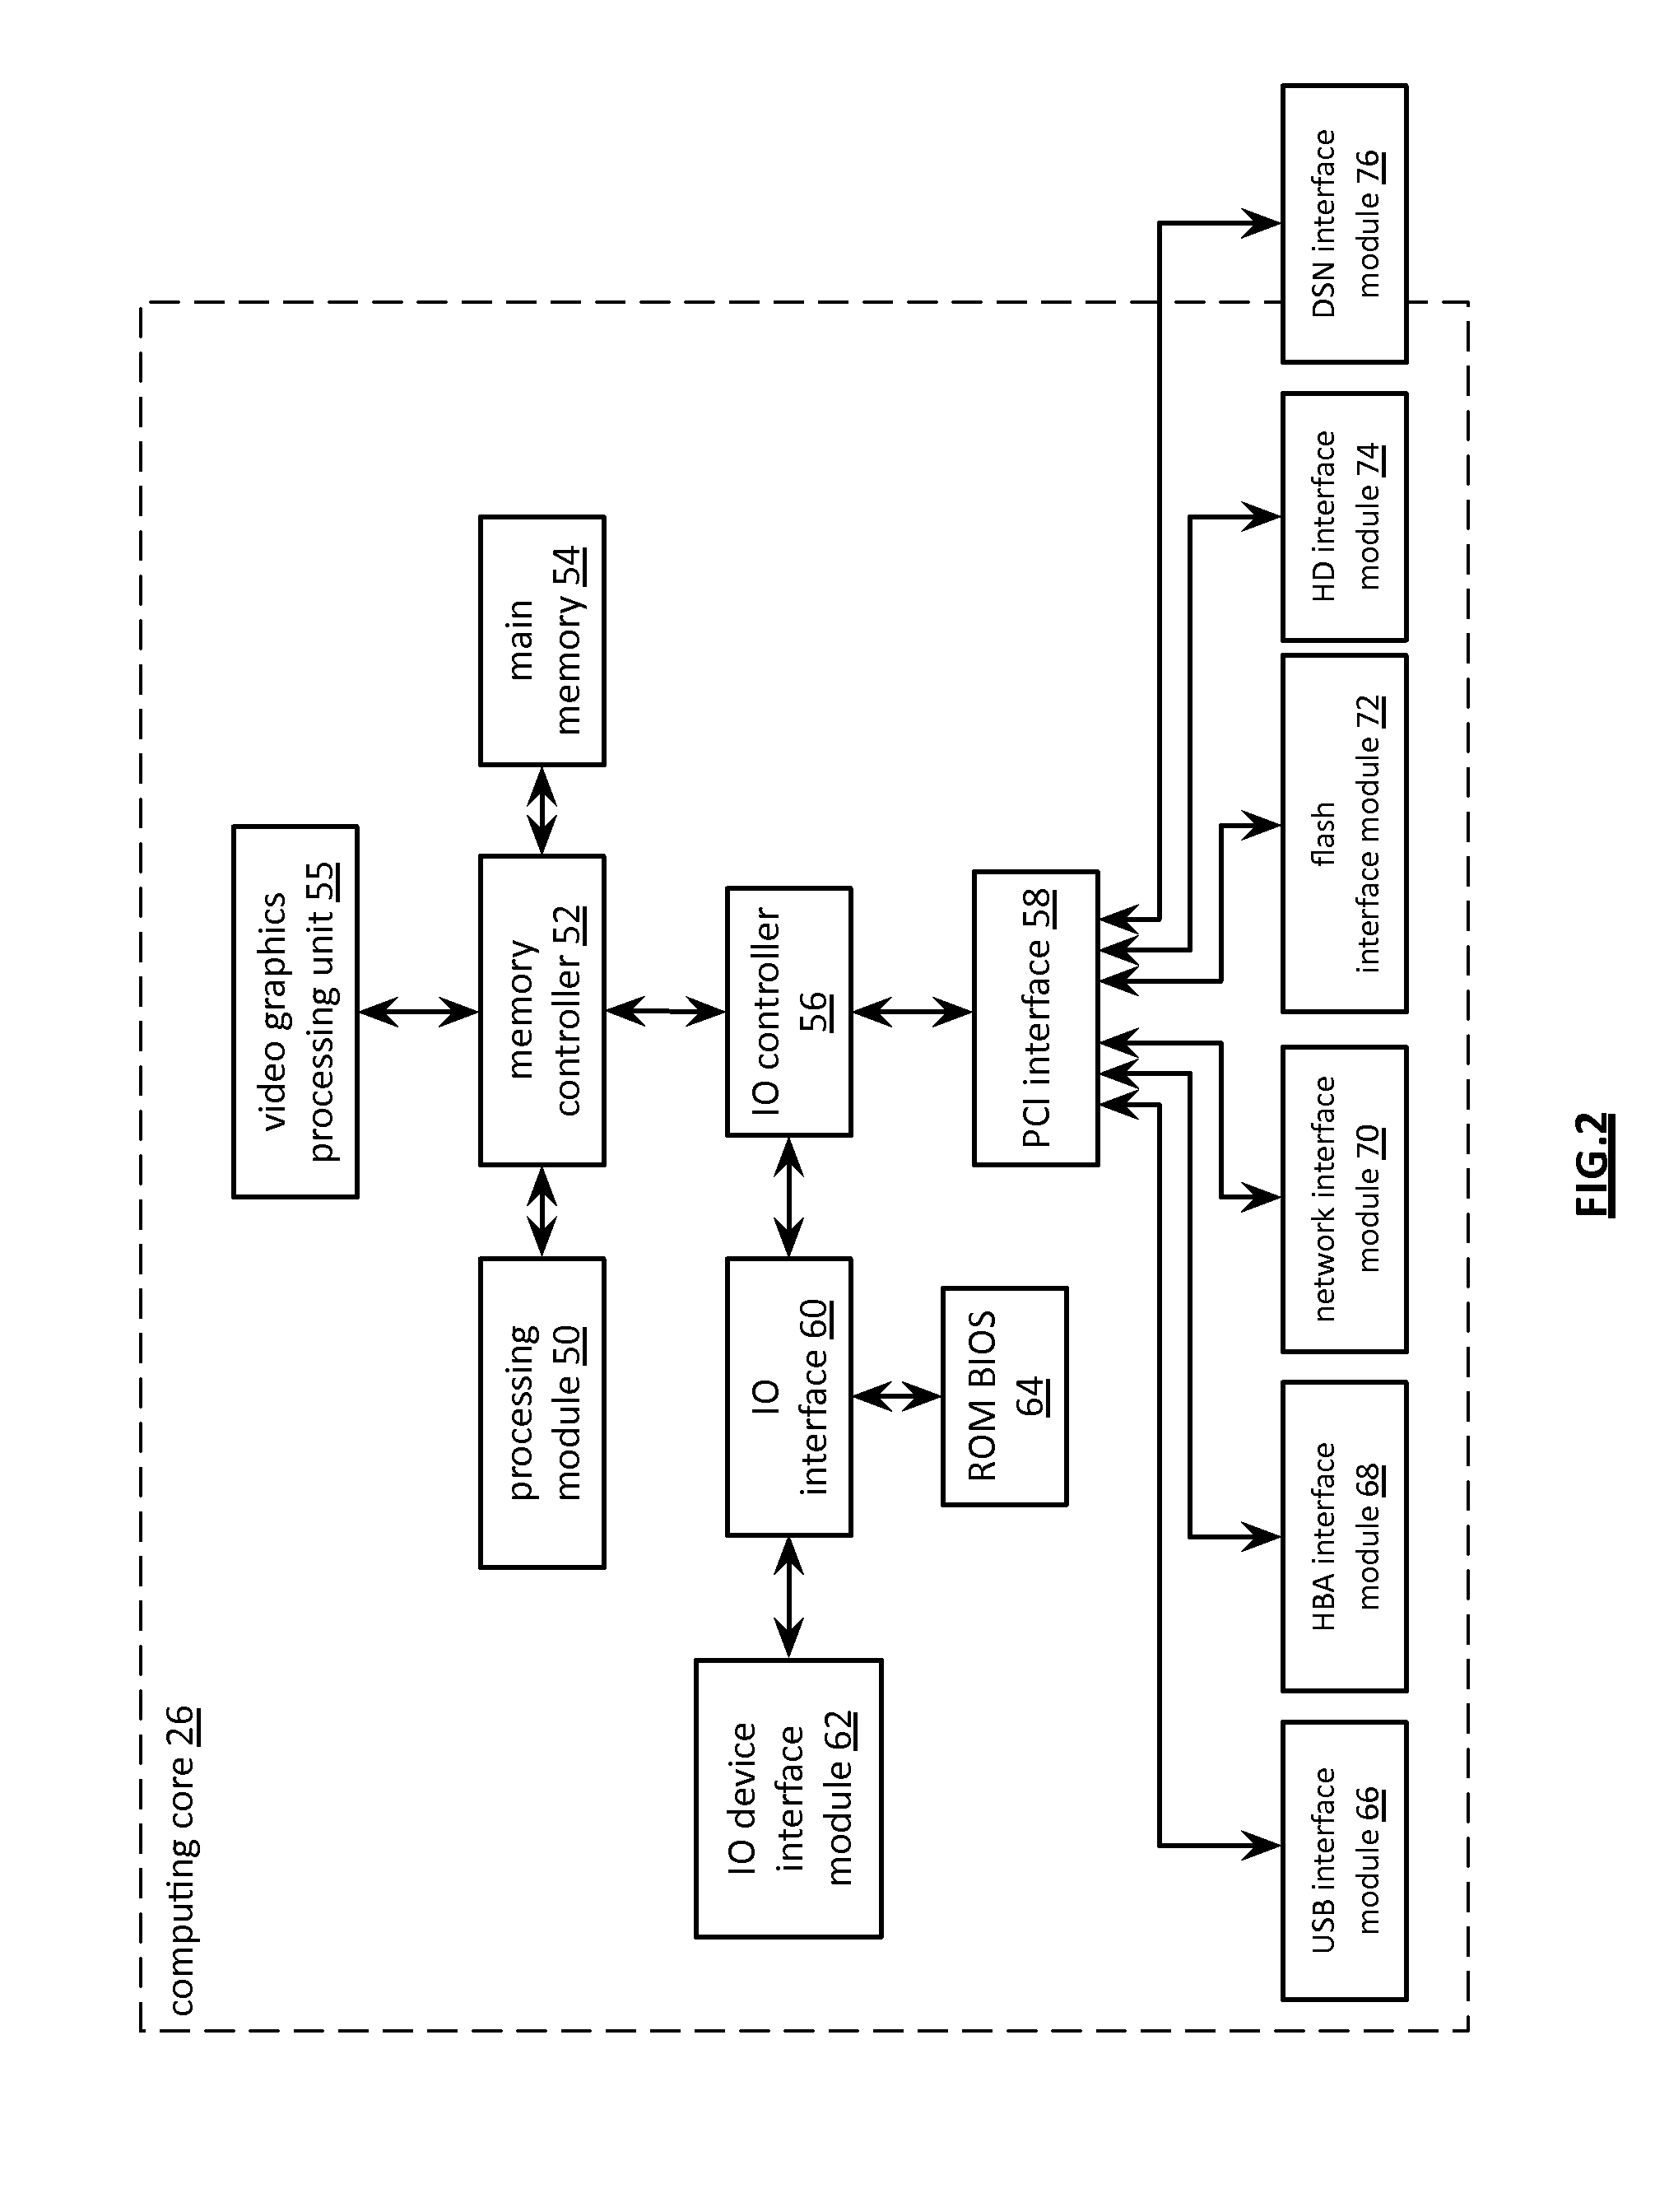 Access control in a dispersed storage network